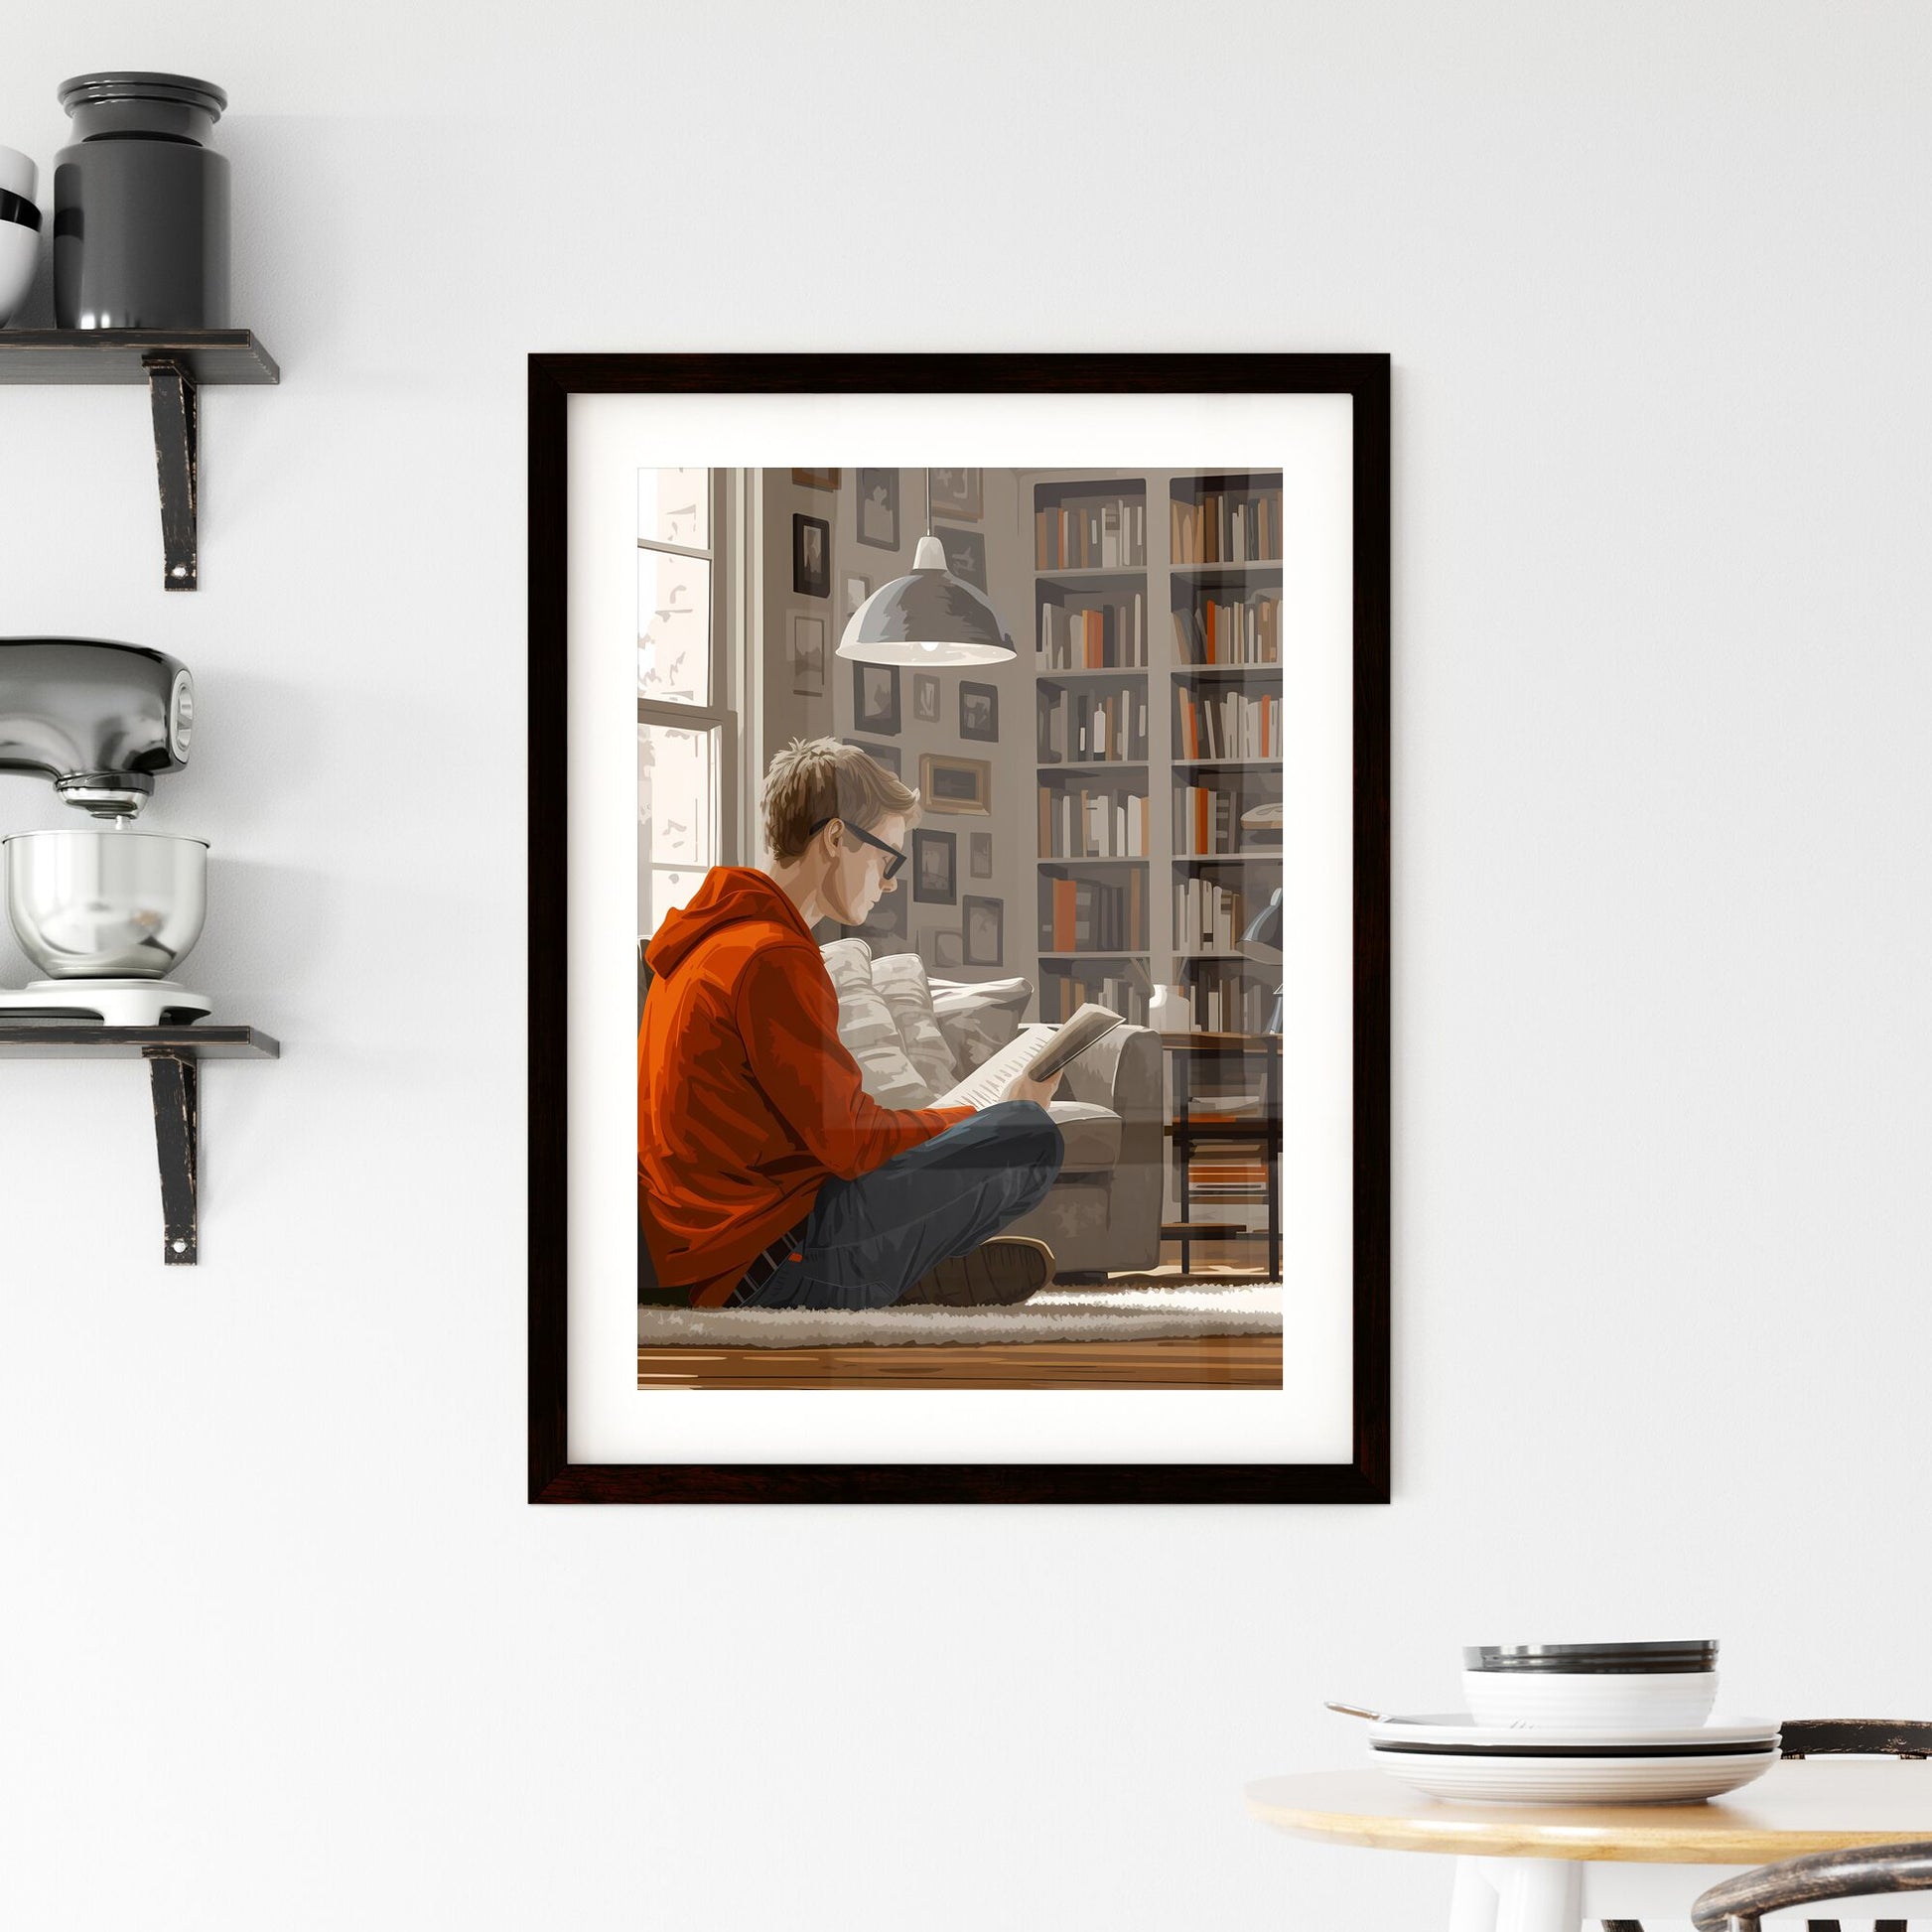 Take a break from the rush - Art print of a man sitting on the floor reading a book Default Title